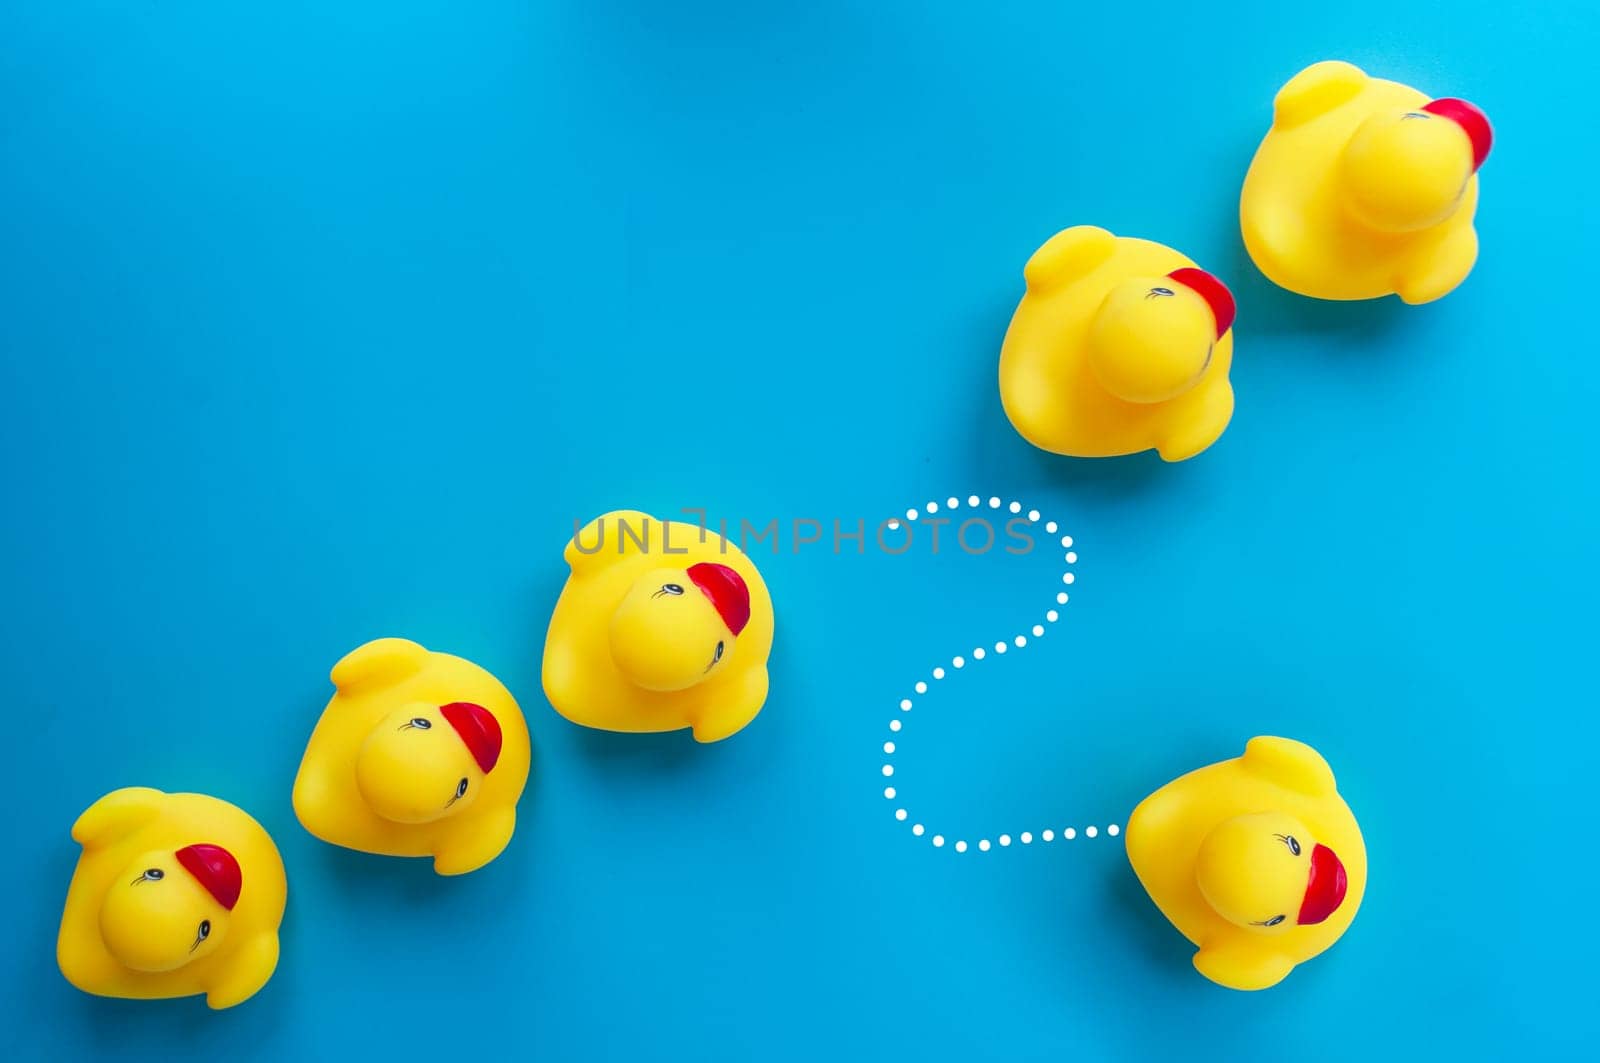 Top view of rubber duck one leaving the others. Leader and followers concept